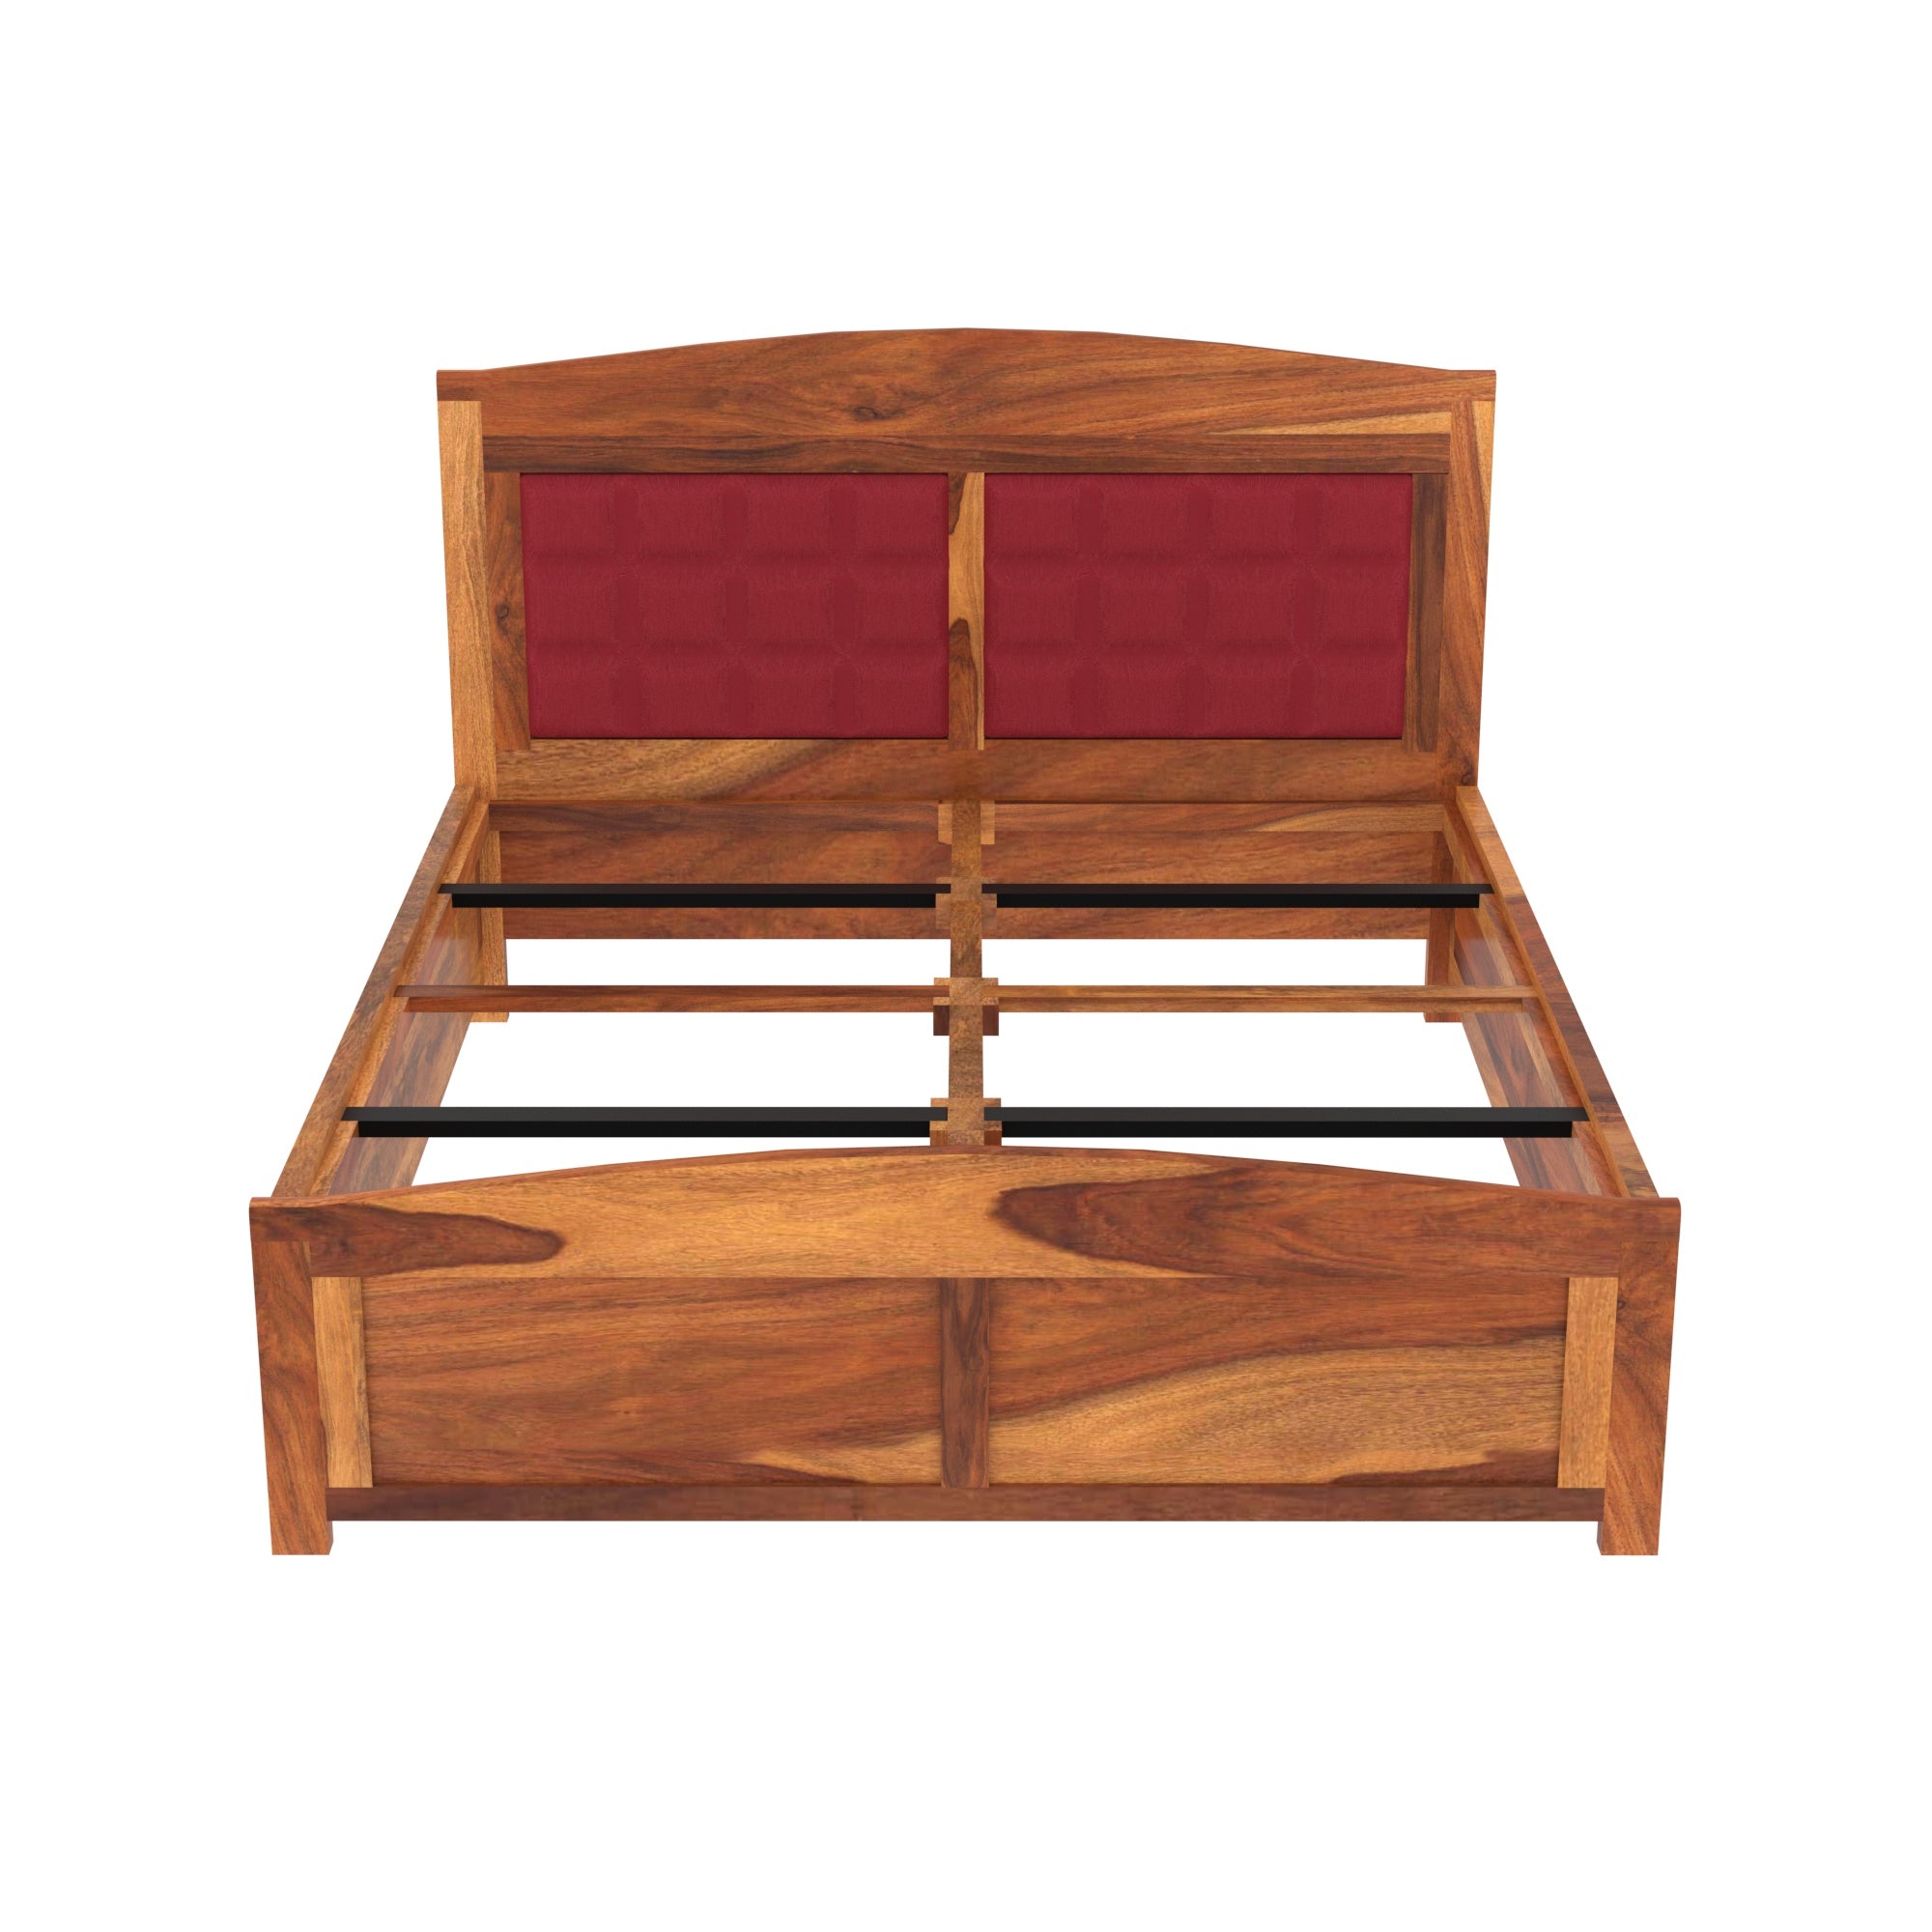 Wooden Classical Upholstered Bed Bed